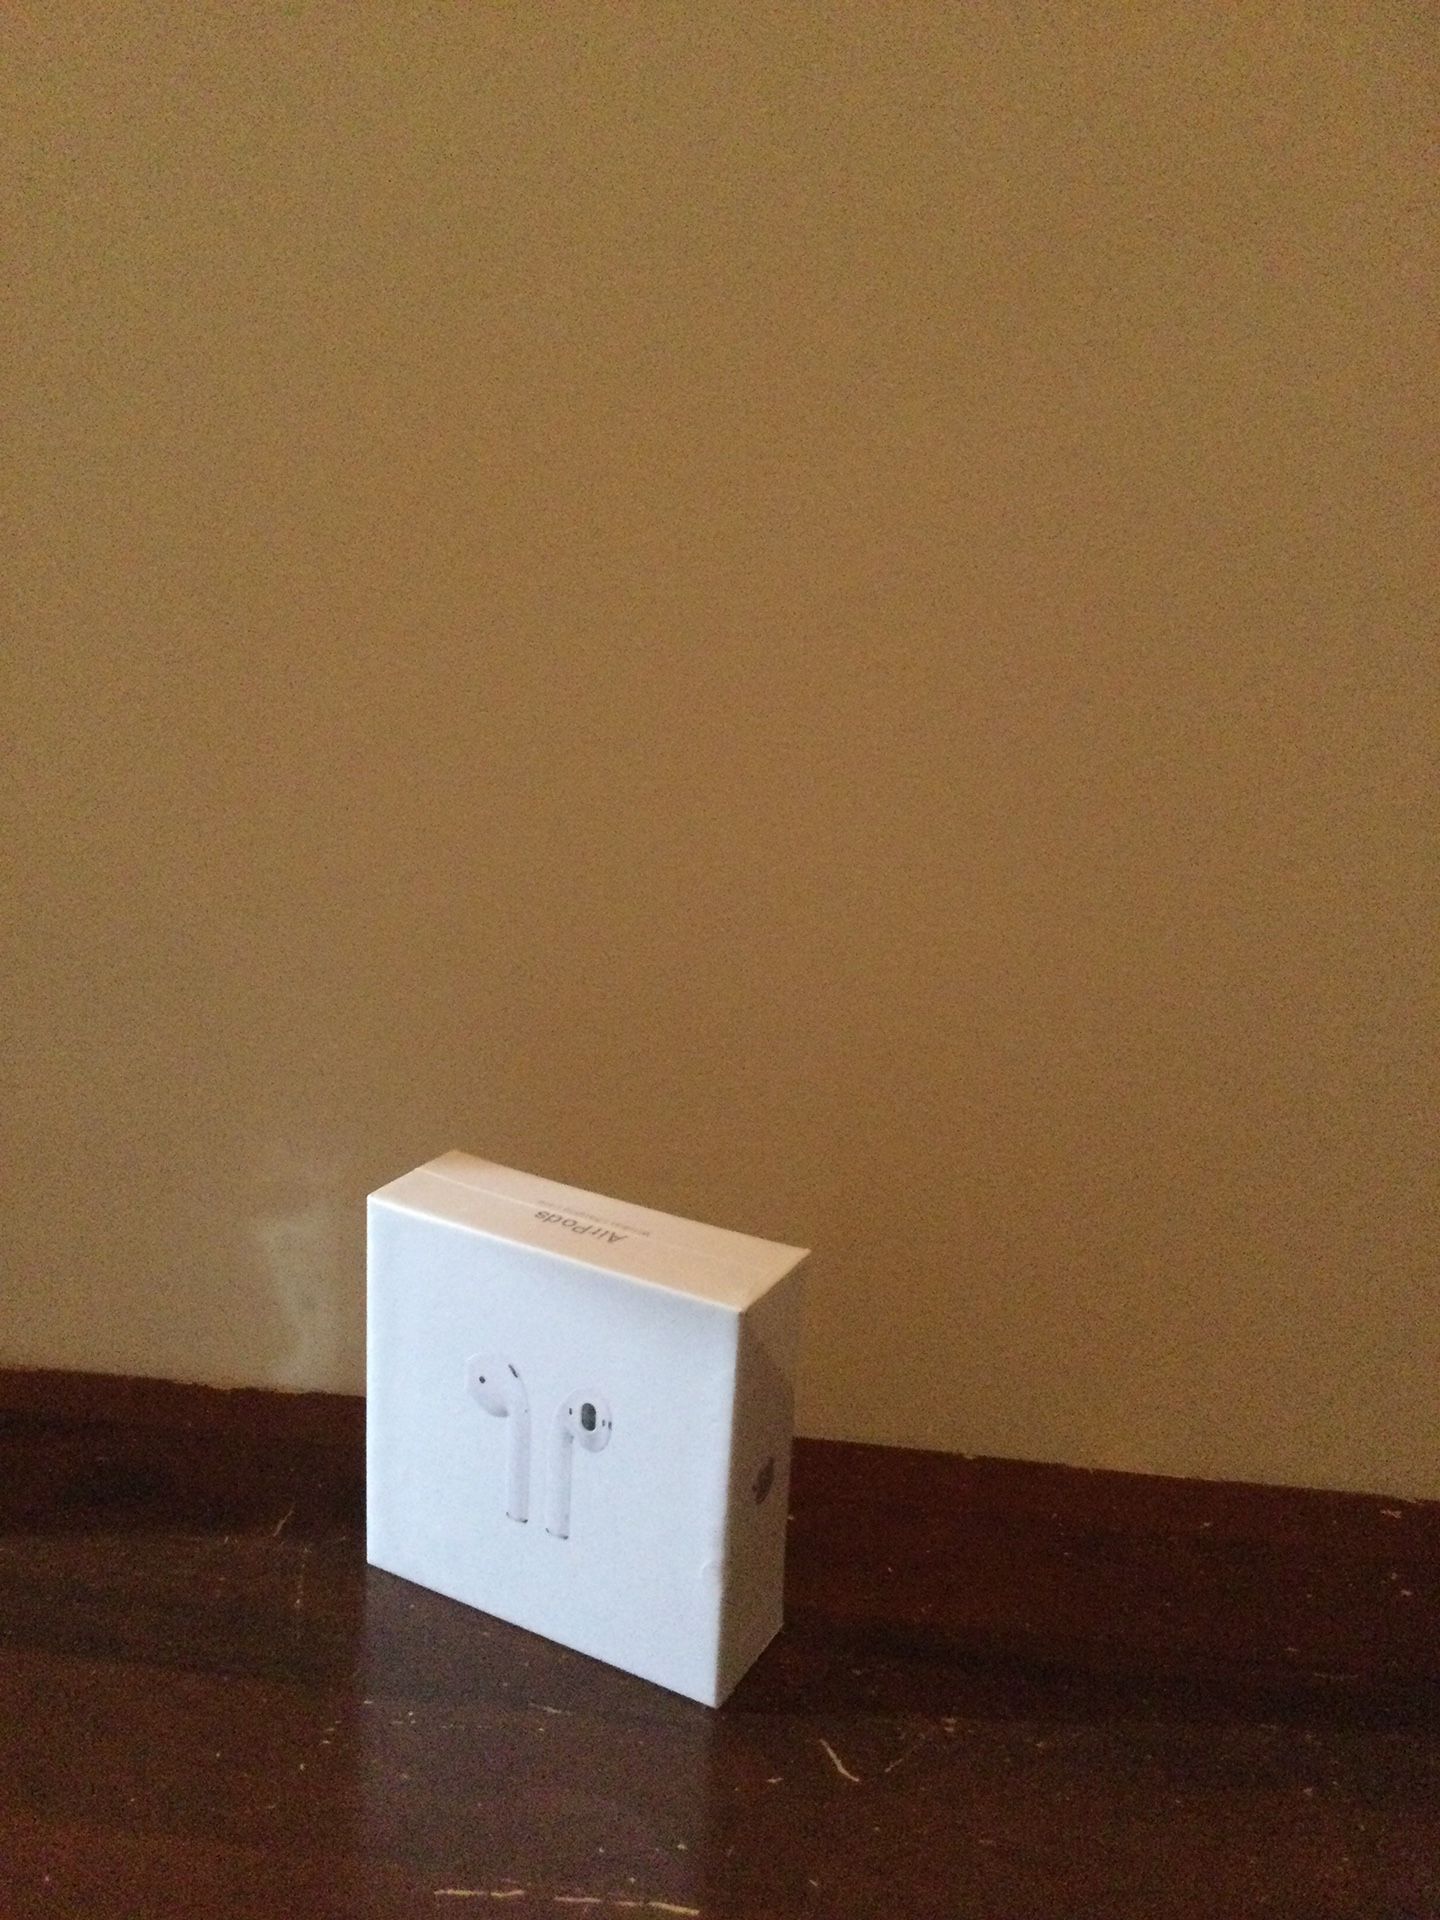 AIRPODS 2 GEN (SEALED PACKAGE)